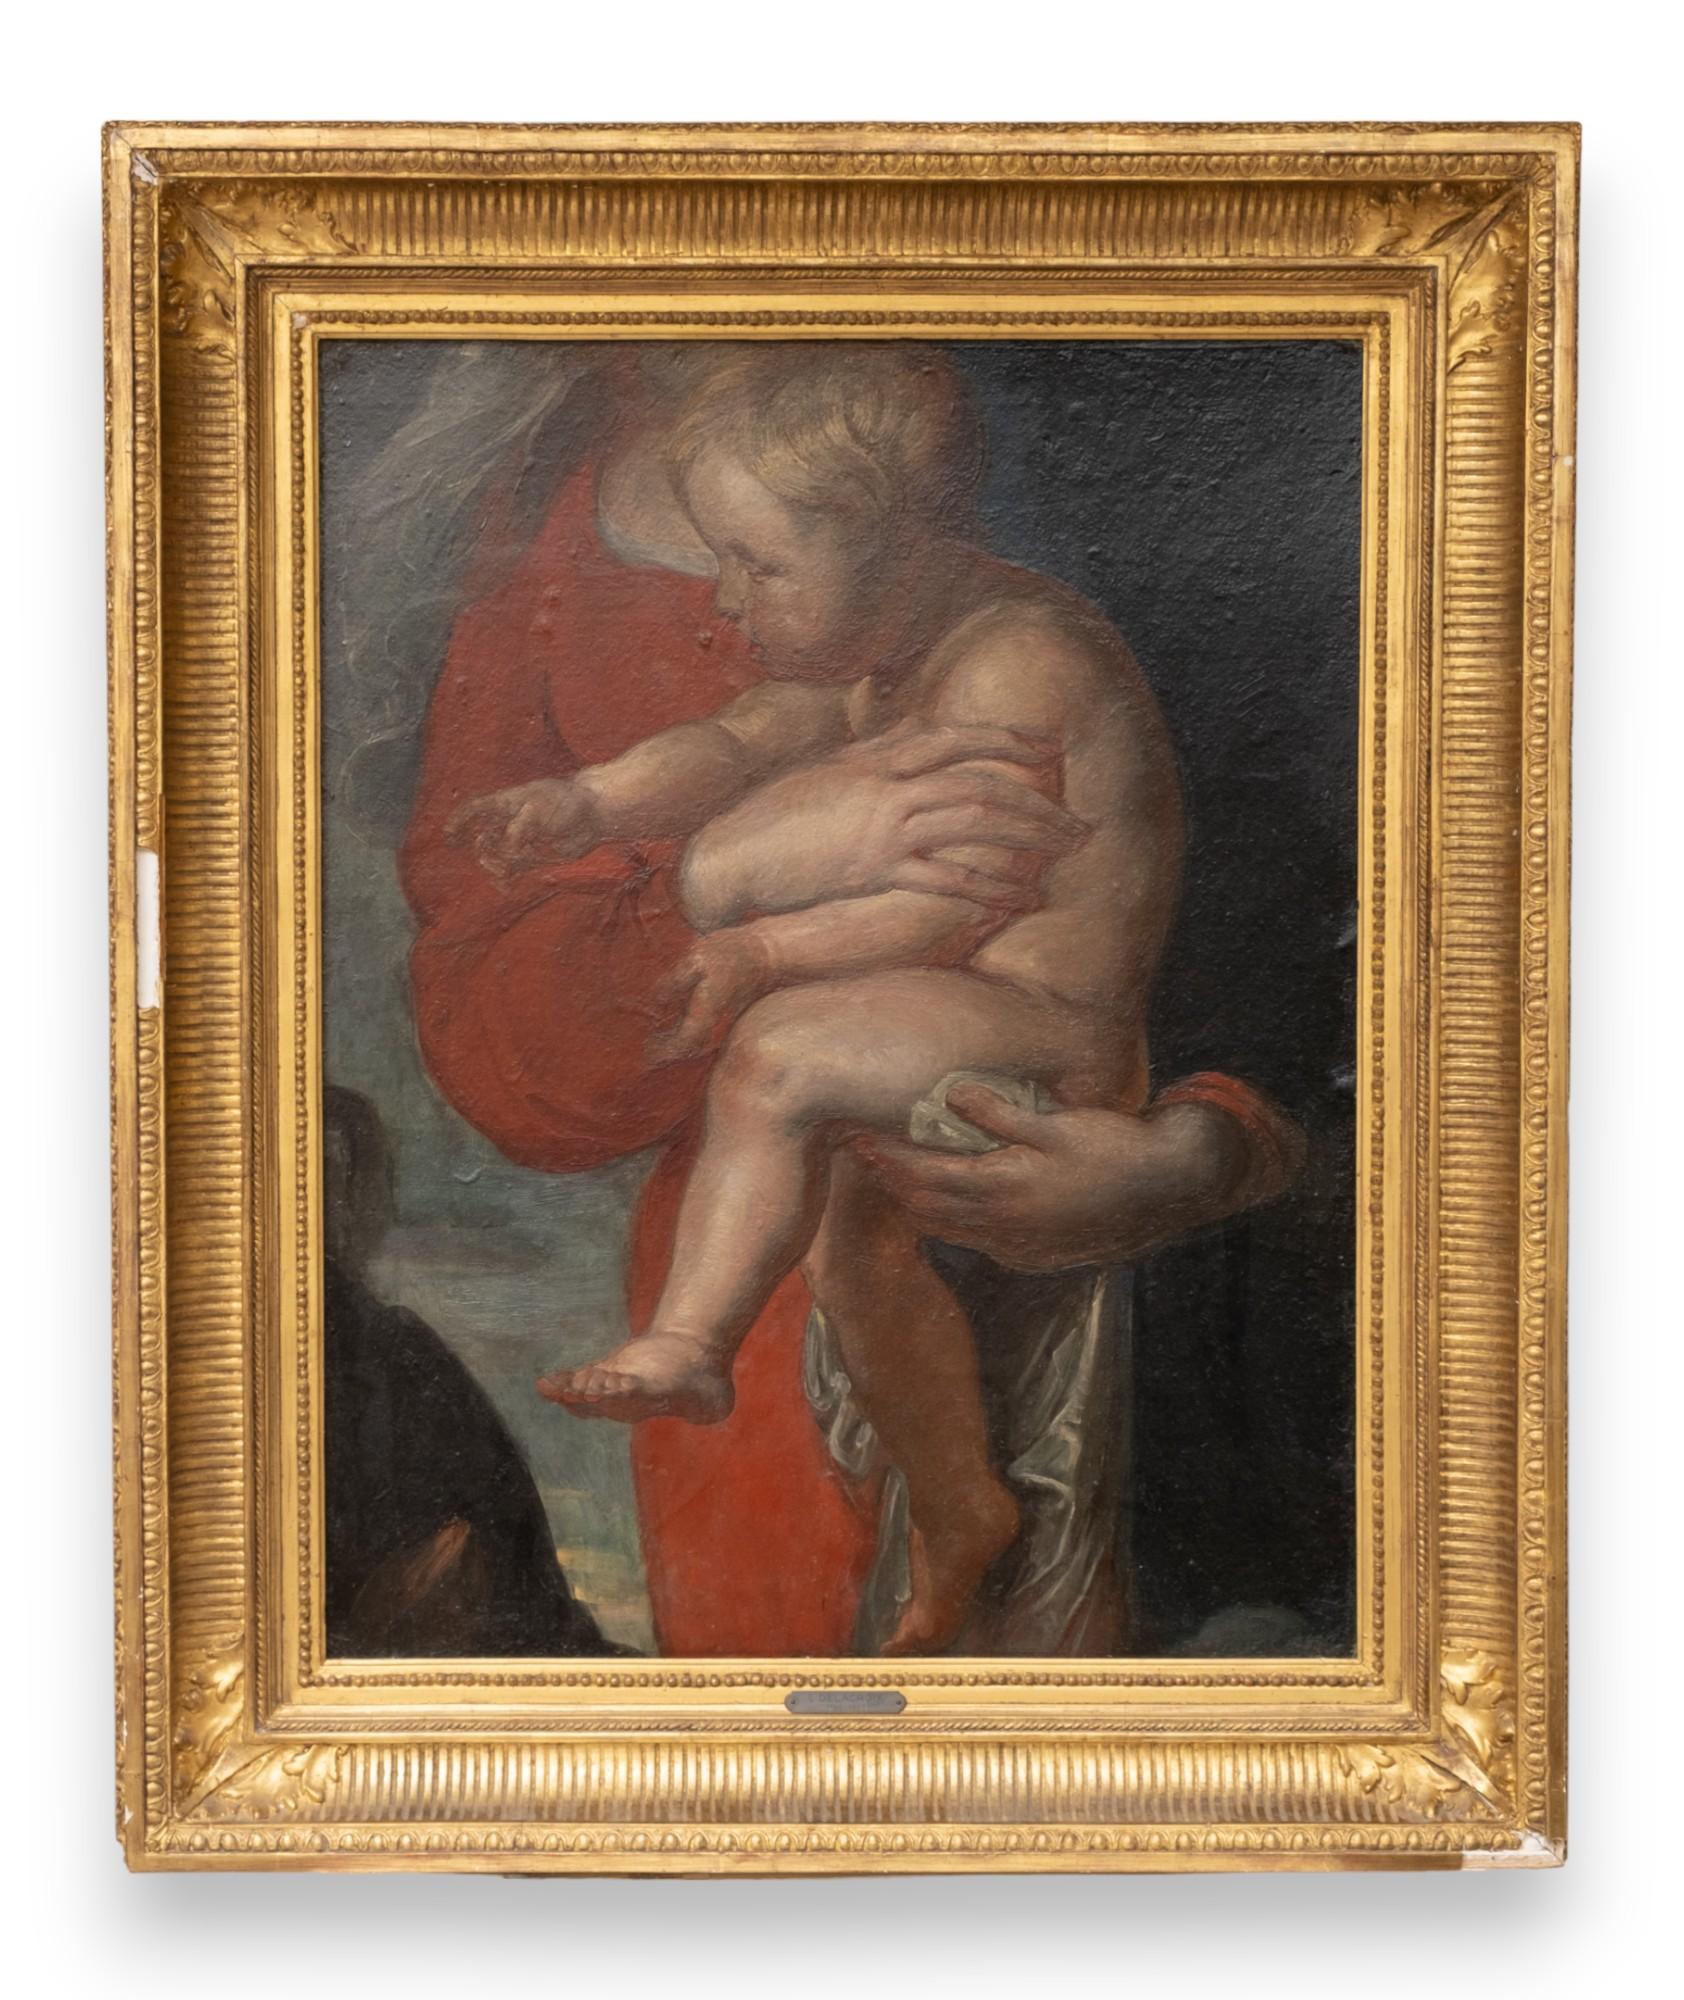 Label On Verso And Bearing A Red Wax Seal: E.D.
FRENCH SCHOOL around 1850 after Peter Paul RUBENS (1577-1640) Detail of a Virgin and Child in a 19th century gilded stuccoed wooden frame bearing on a cartel an old attribution to Eugène DELACROIX